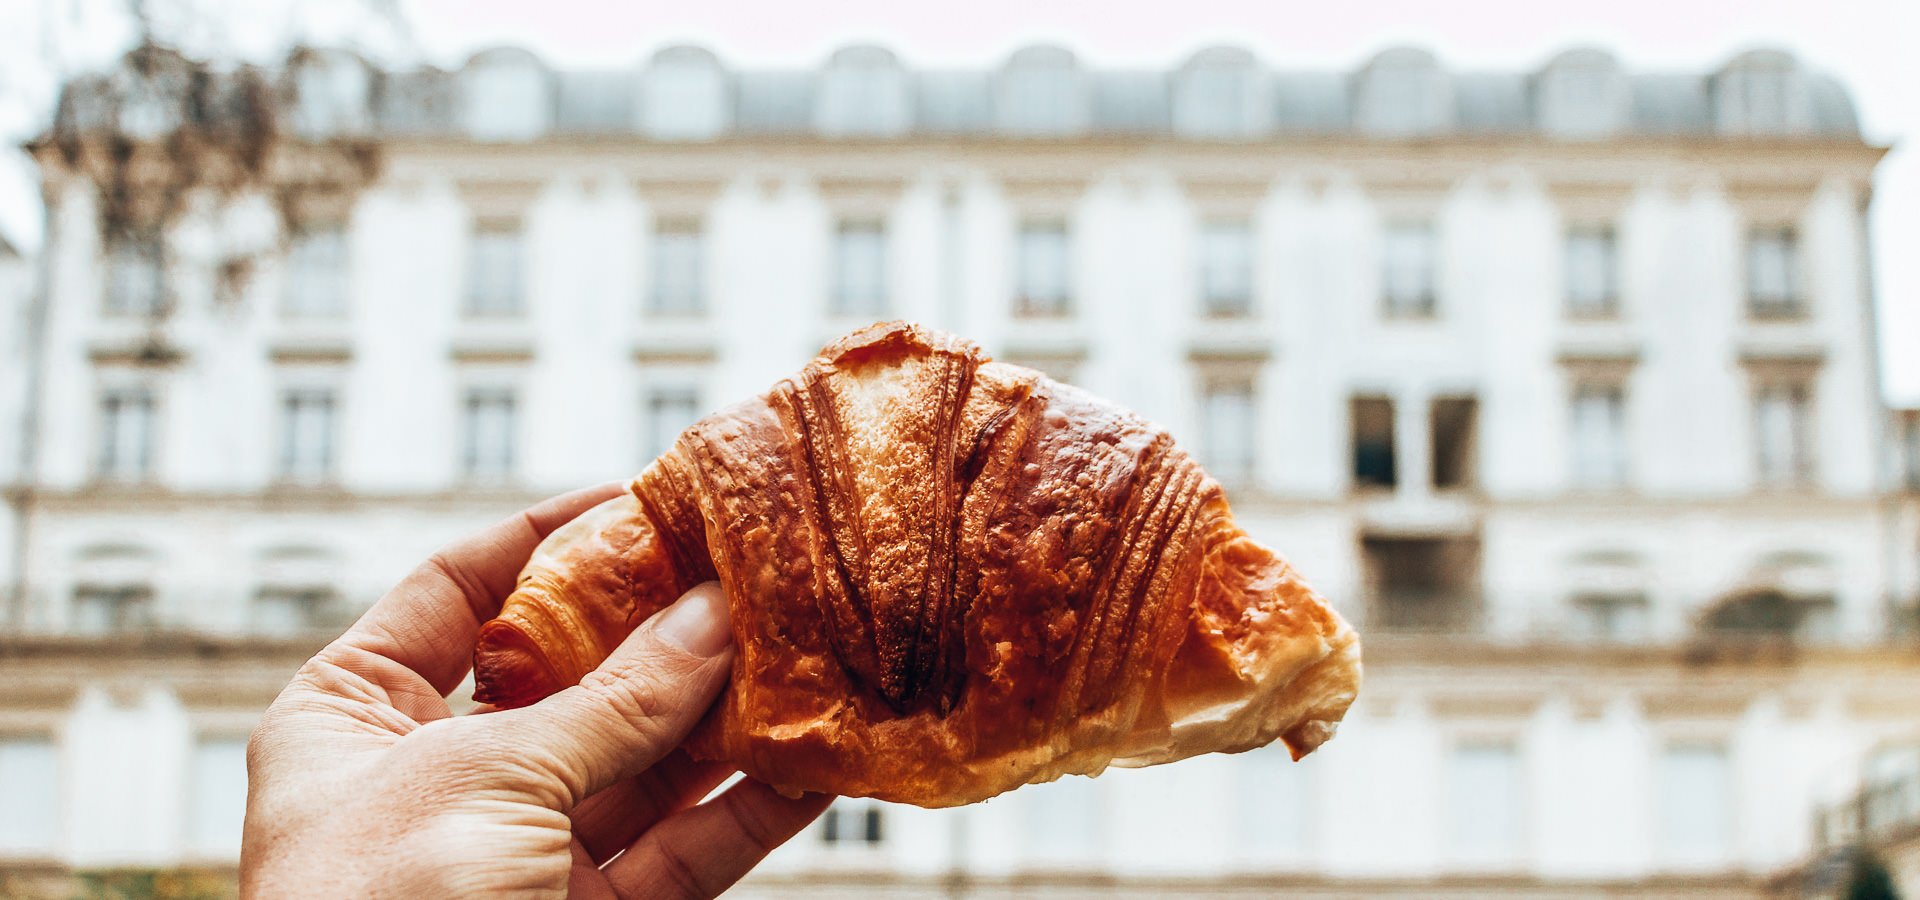 8 Of The Best Bakeries and Pâtisseries In Paris | dress for the italian riviera 3